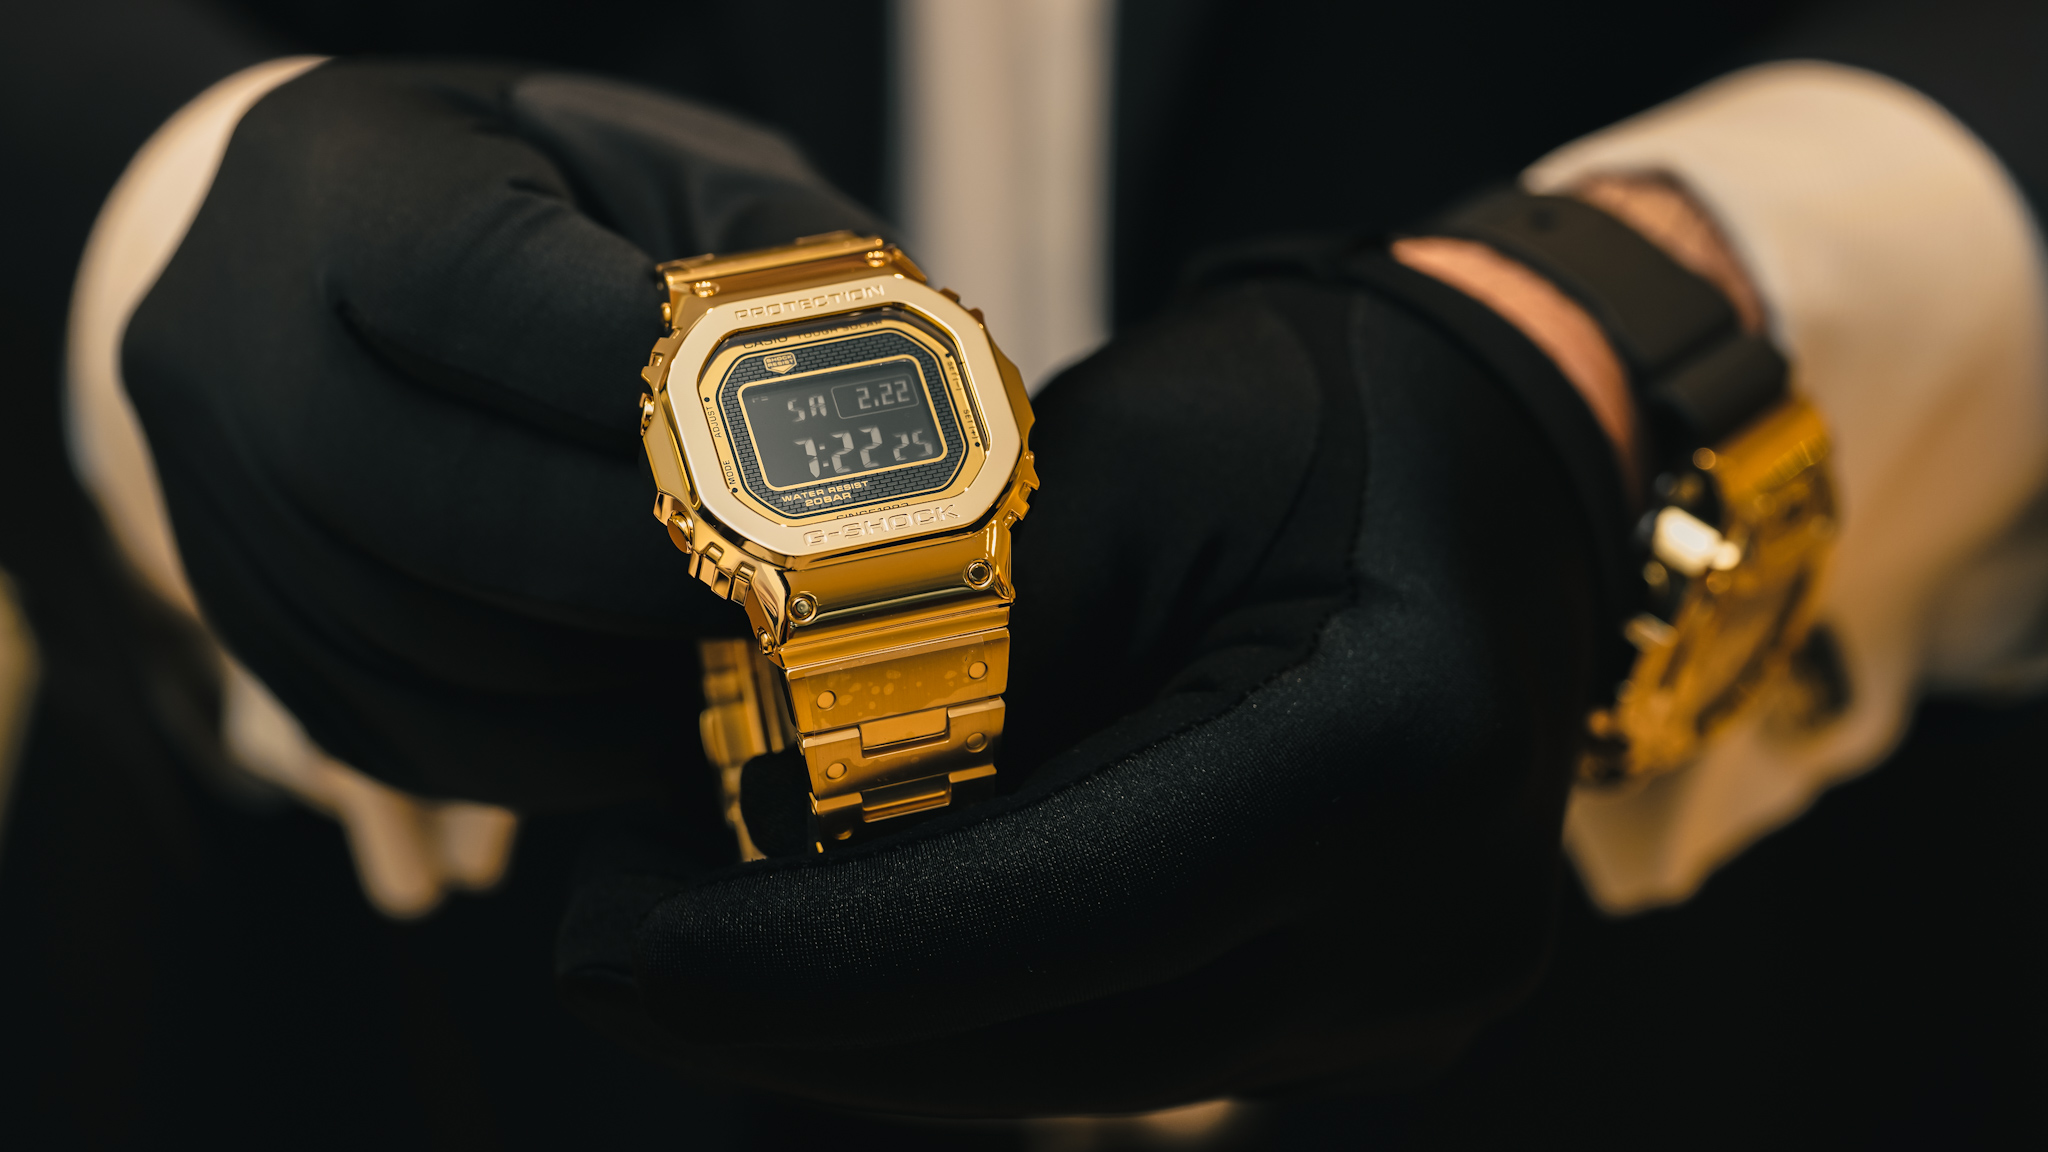 Unboxing The Solid Gold G Shock G D5000 9jr Dream Project At Topper Jewelers Ablogtowatch